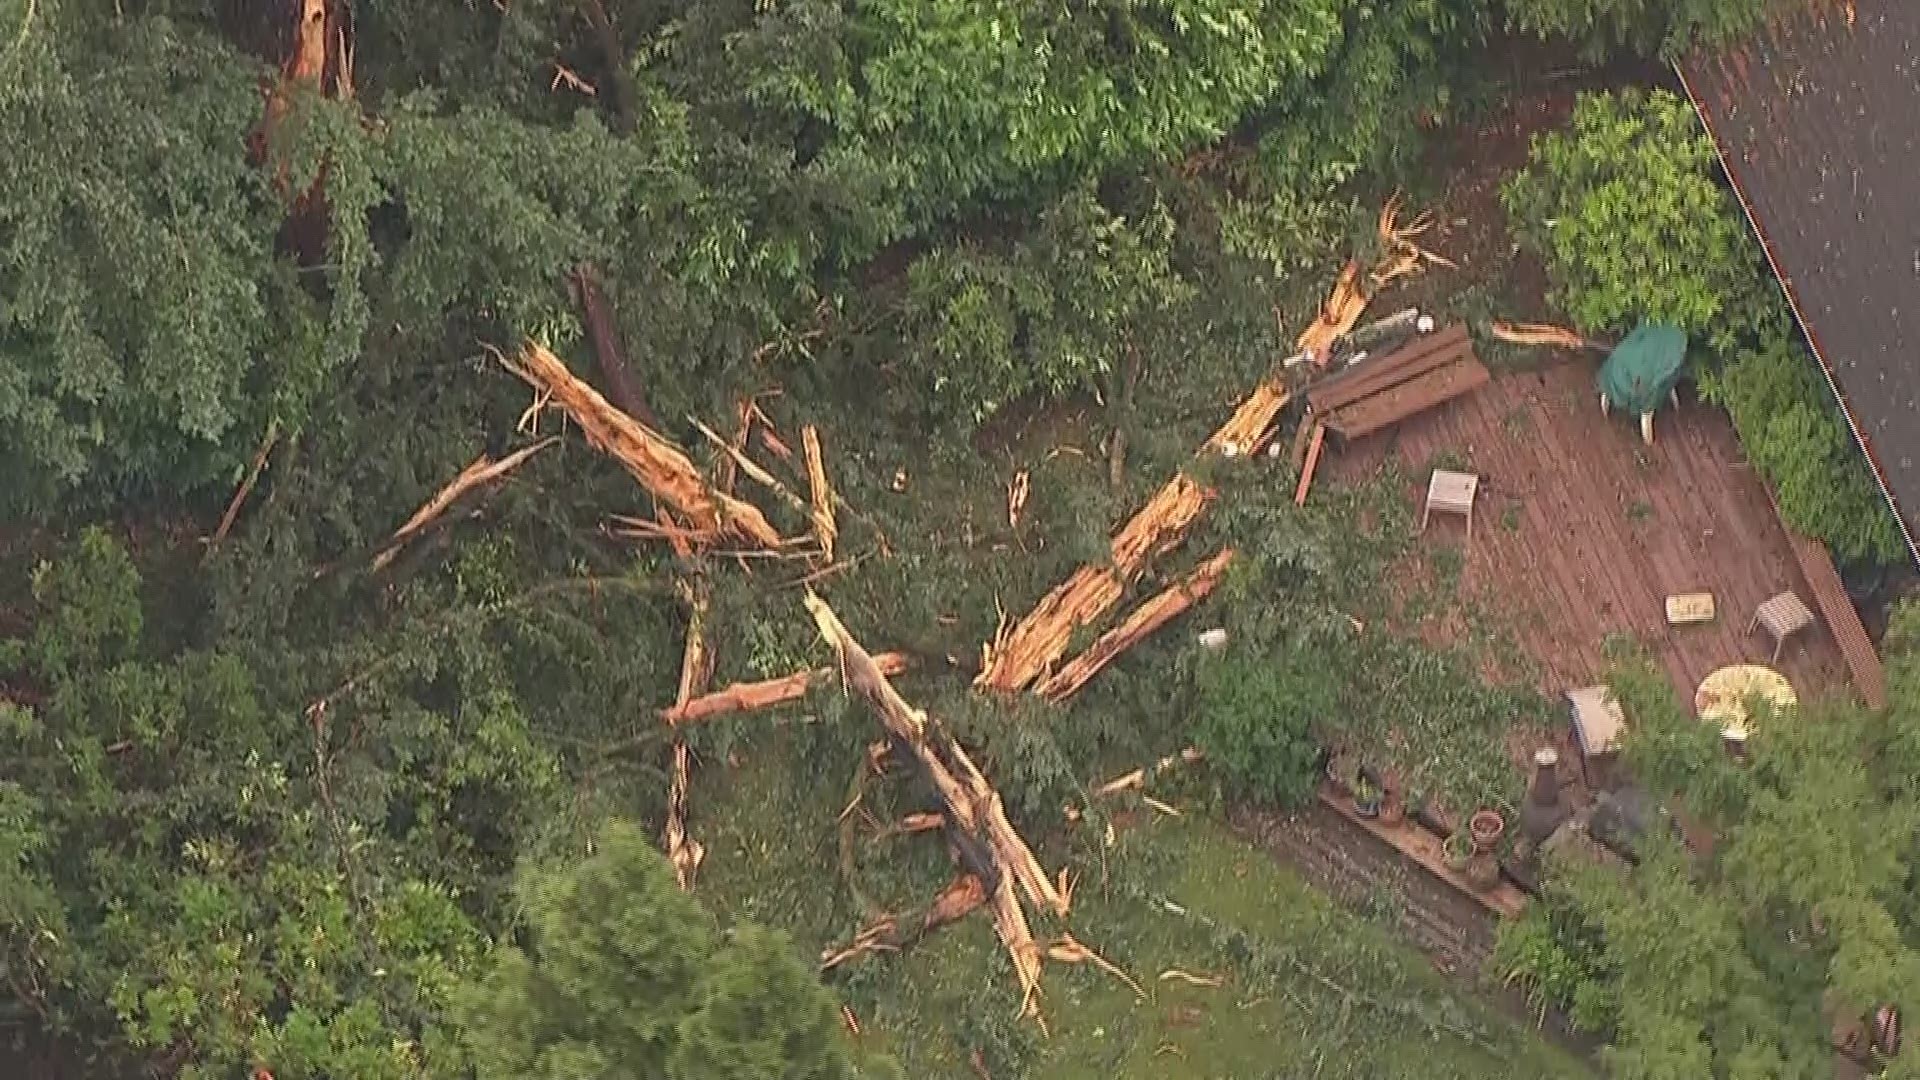 Lightning brought down at least 3 trees in Beaverton Thursday morning. No one was hurt.